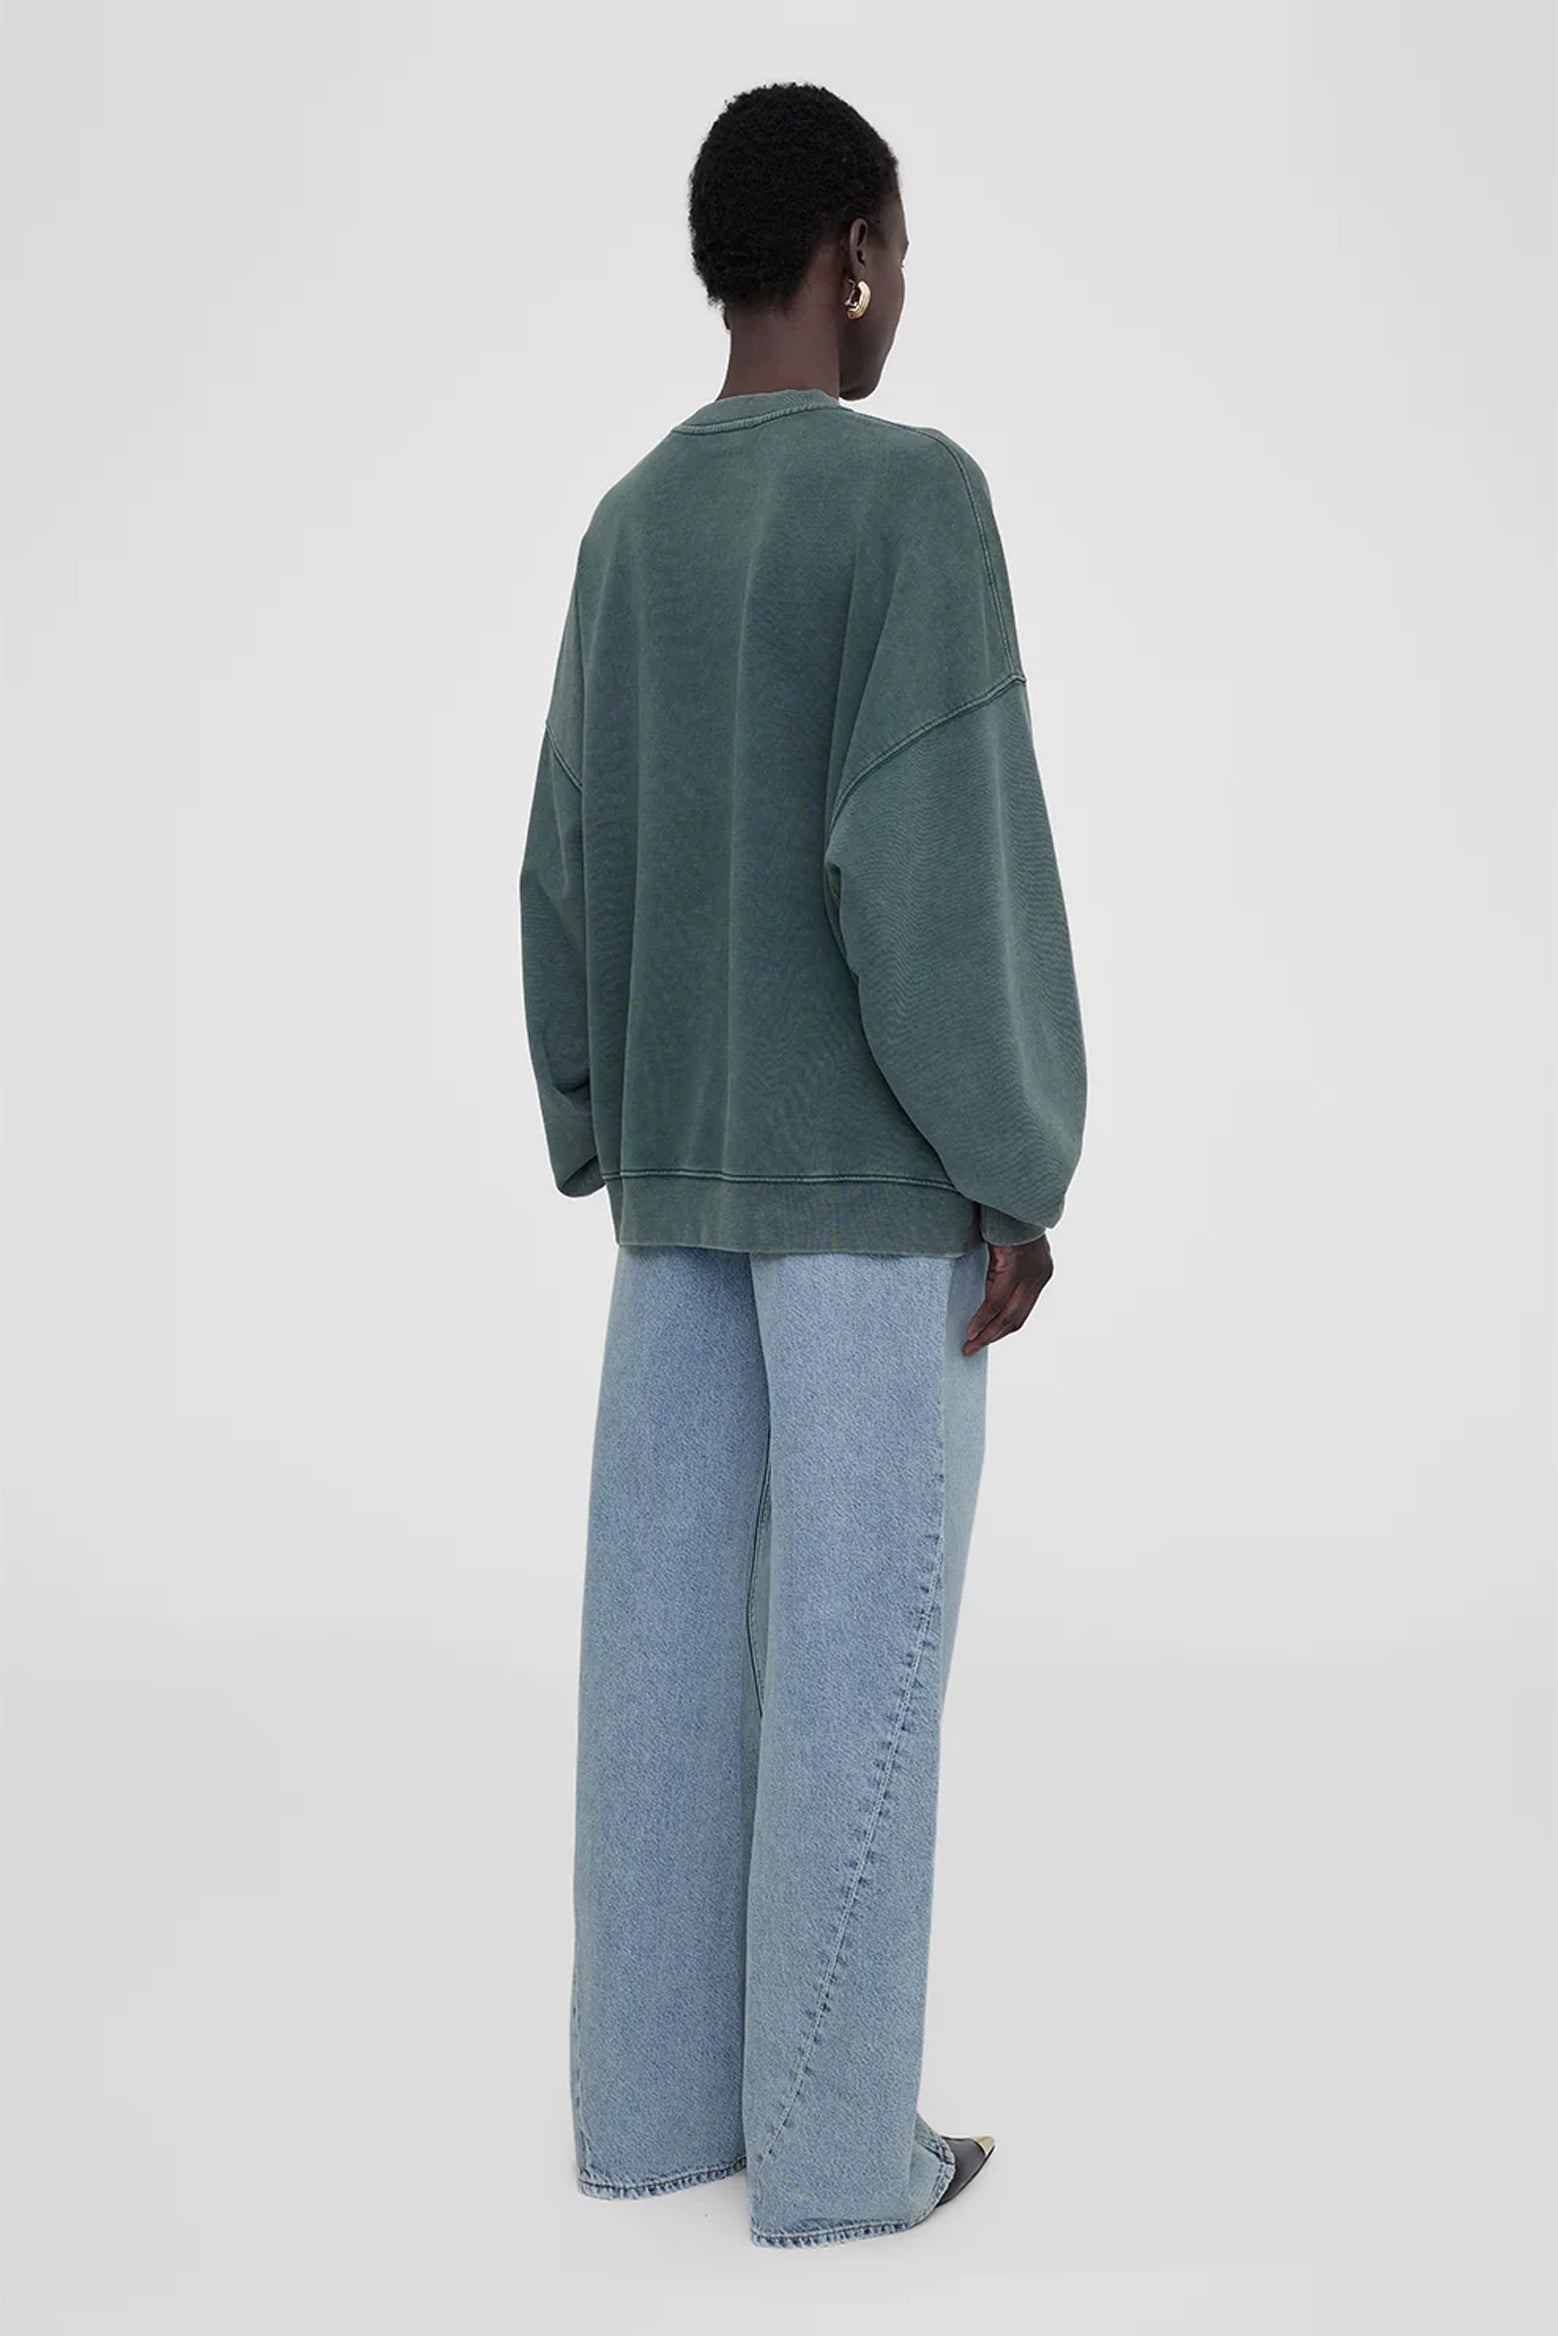 Anine Bing Miles Sweatshirt in Green available at The New Trend Australia.